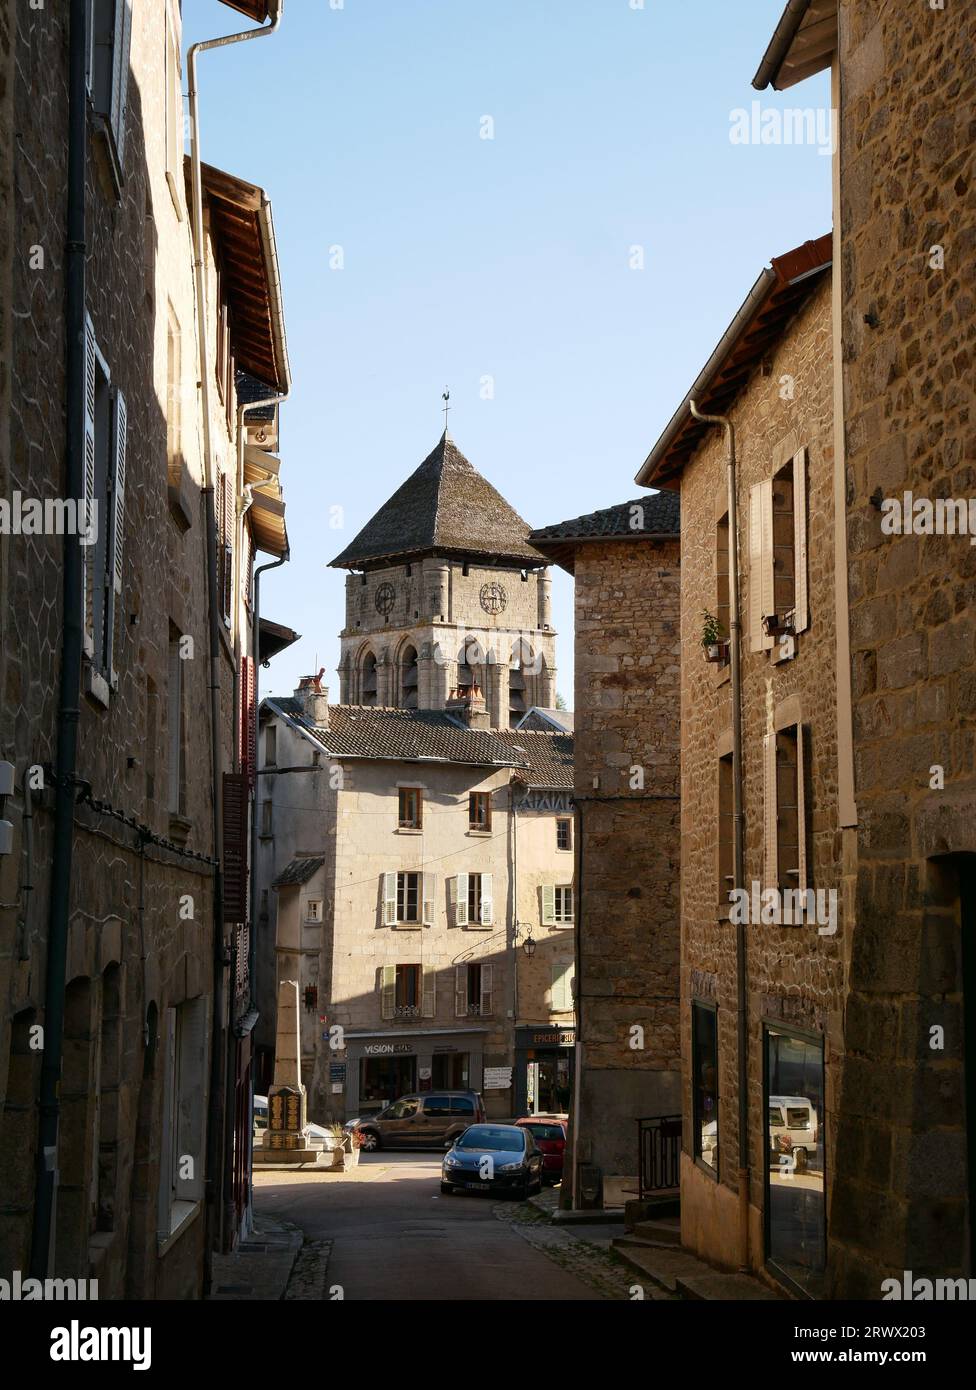 Eymoutiers, Haute-Vienne department in the Nouvelle-Aquitaine region in western France. Stock Photo